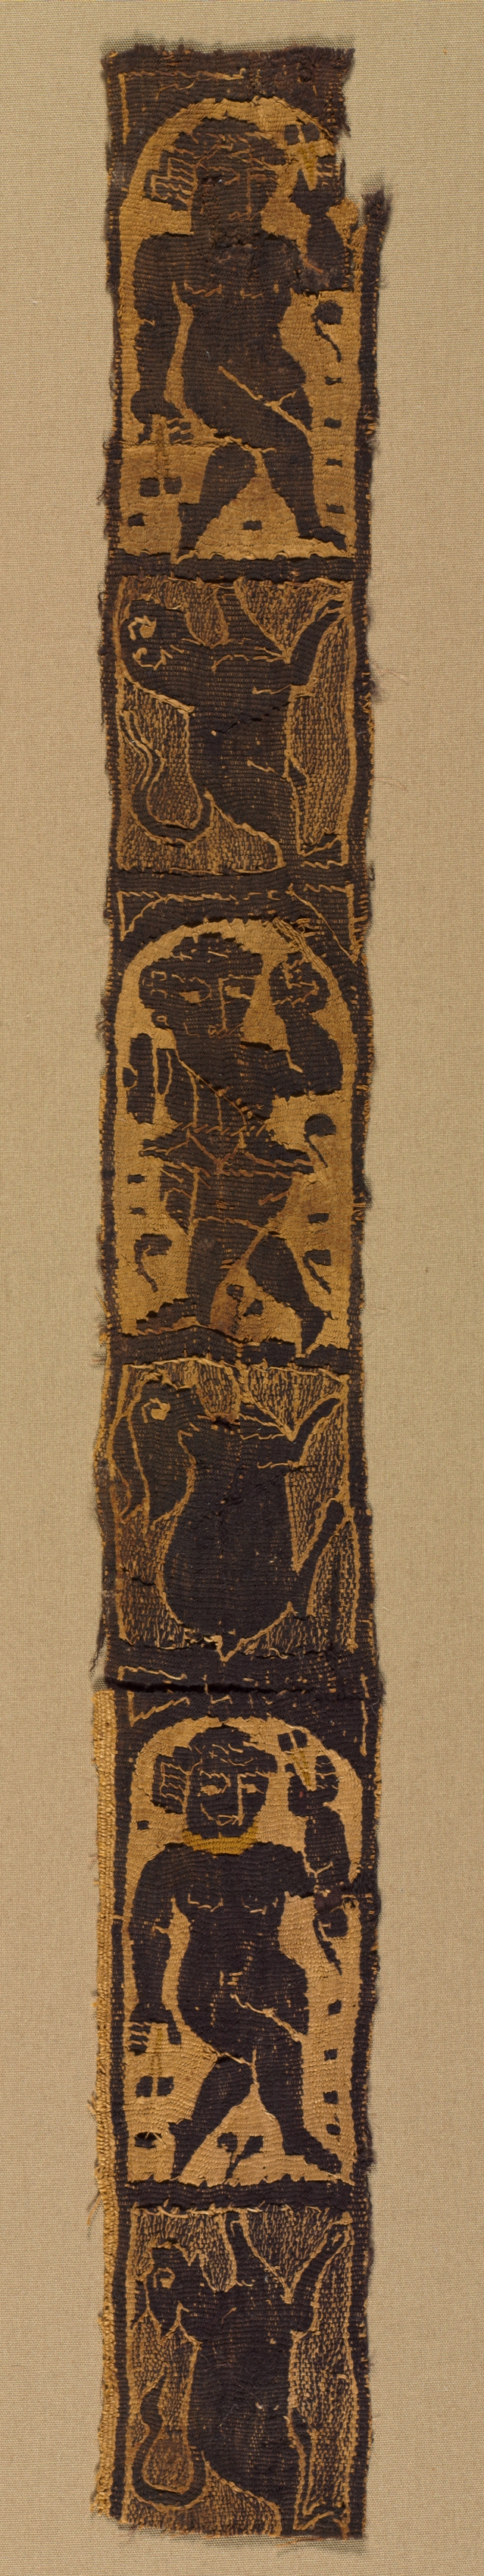 Ornamental Shoulder Bands from a Tunic